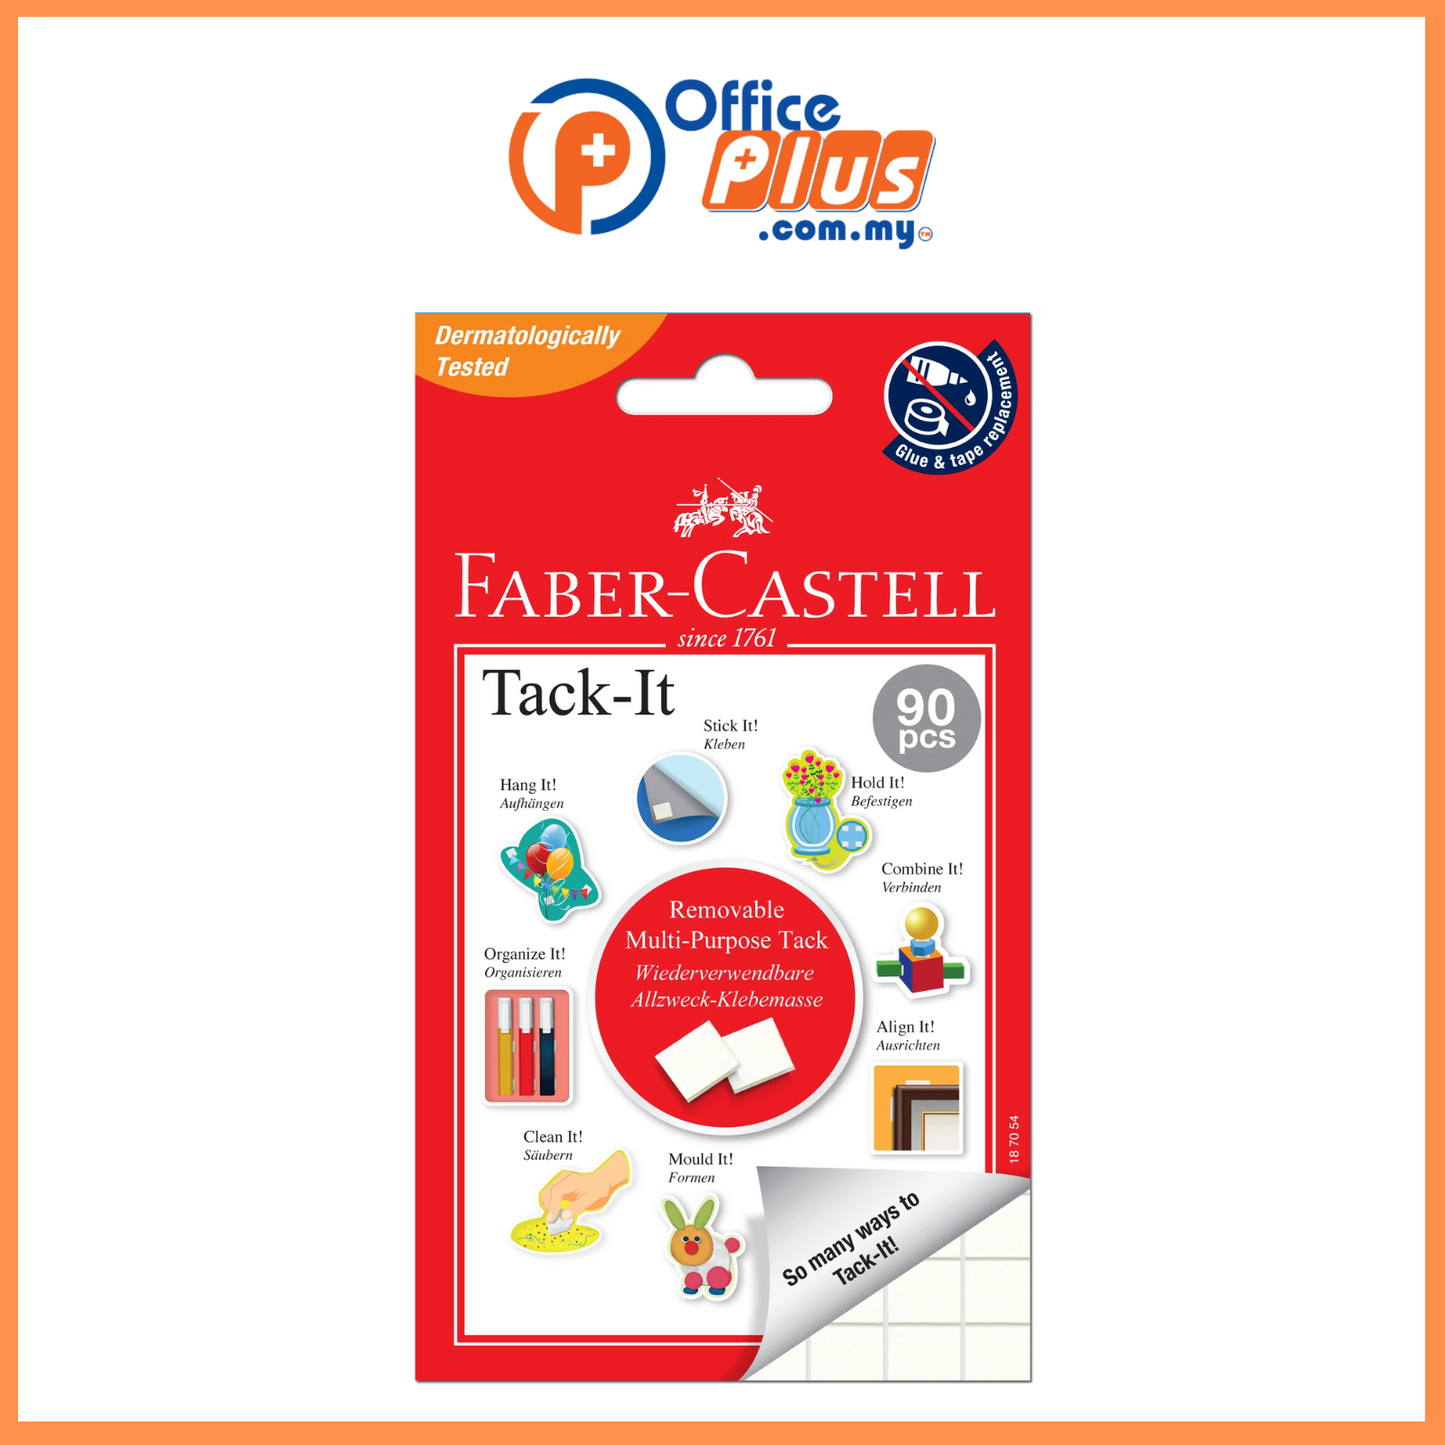 Faber-Castell Adhesive Tack-It White 50G (90 Pcs) - OfficePlus